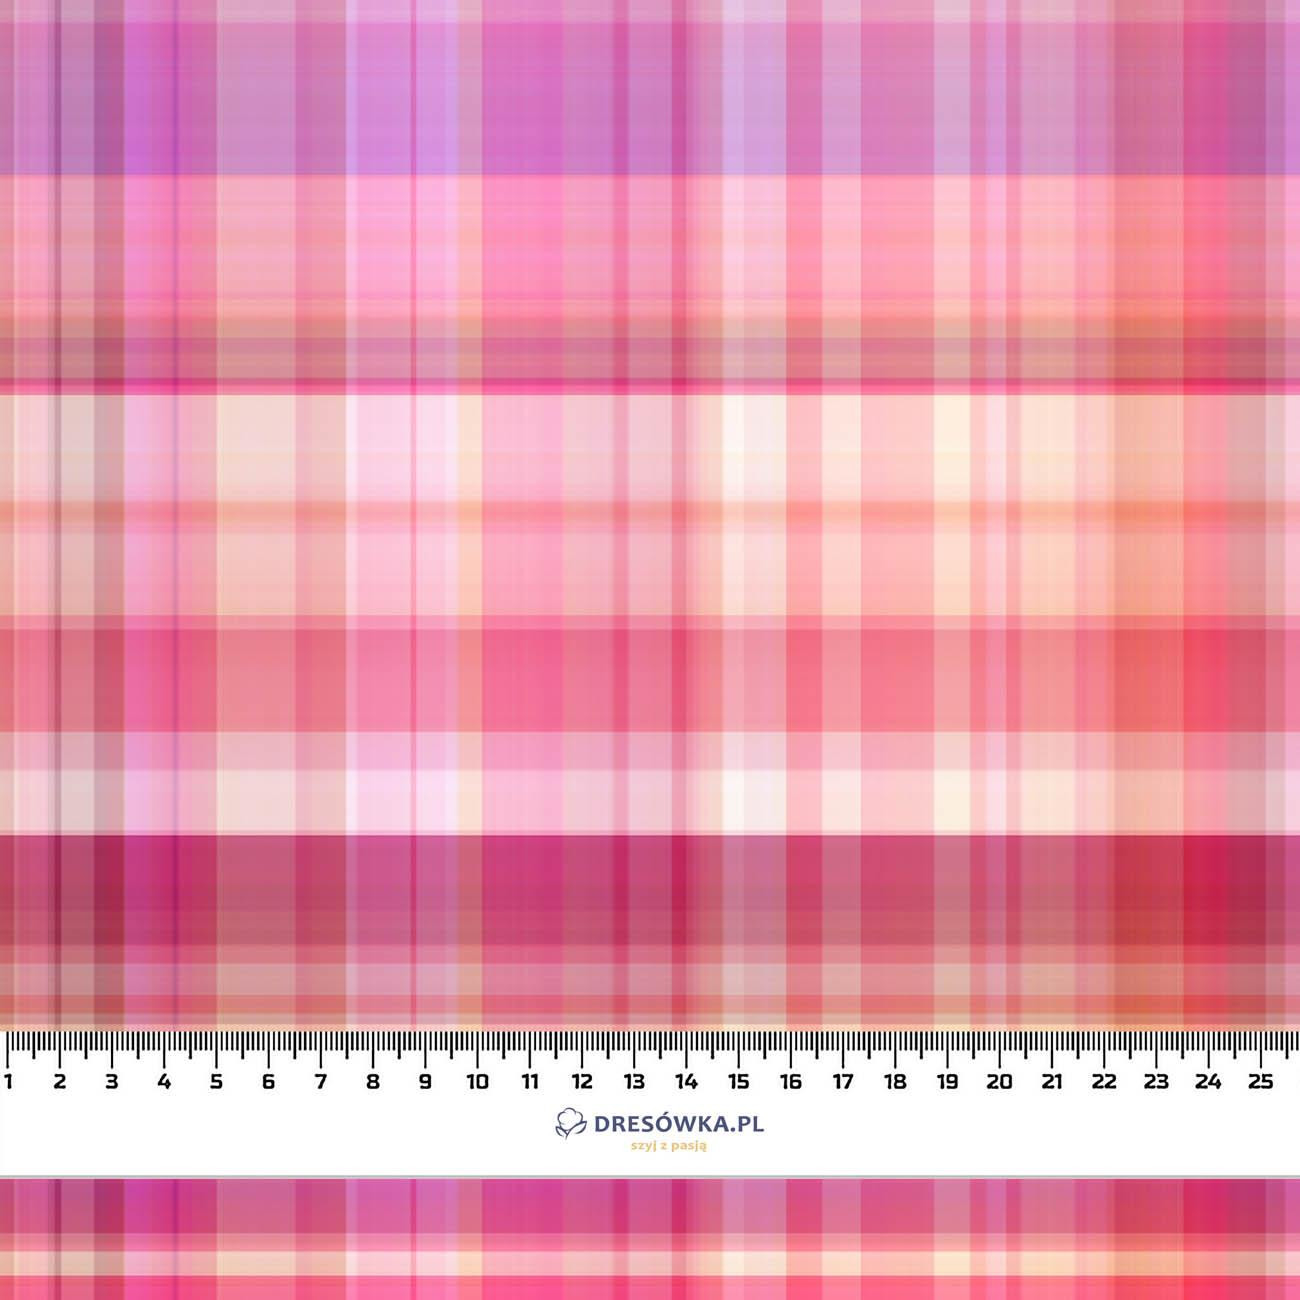 PINK CHECK PAT. 1 - single jersey with elastane 